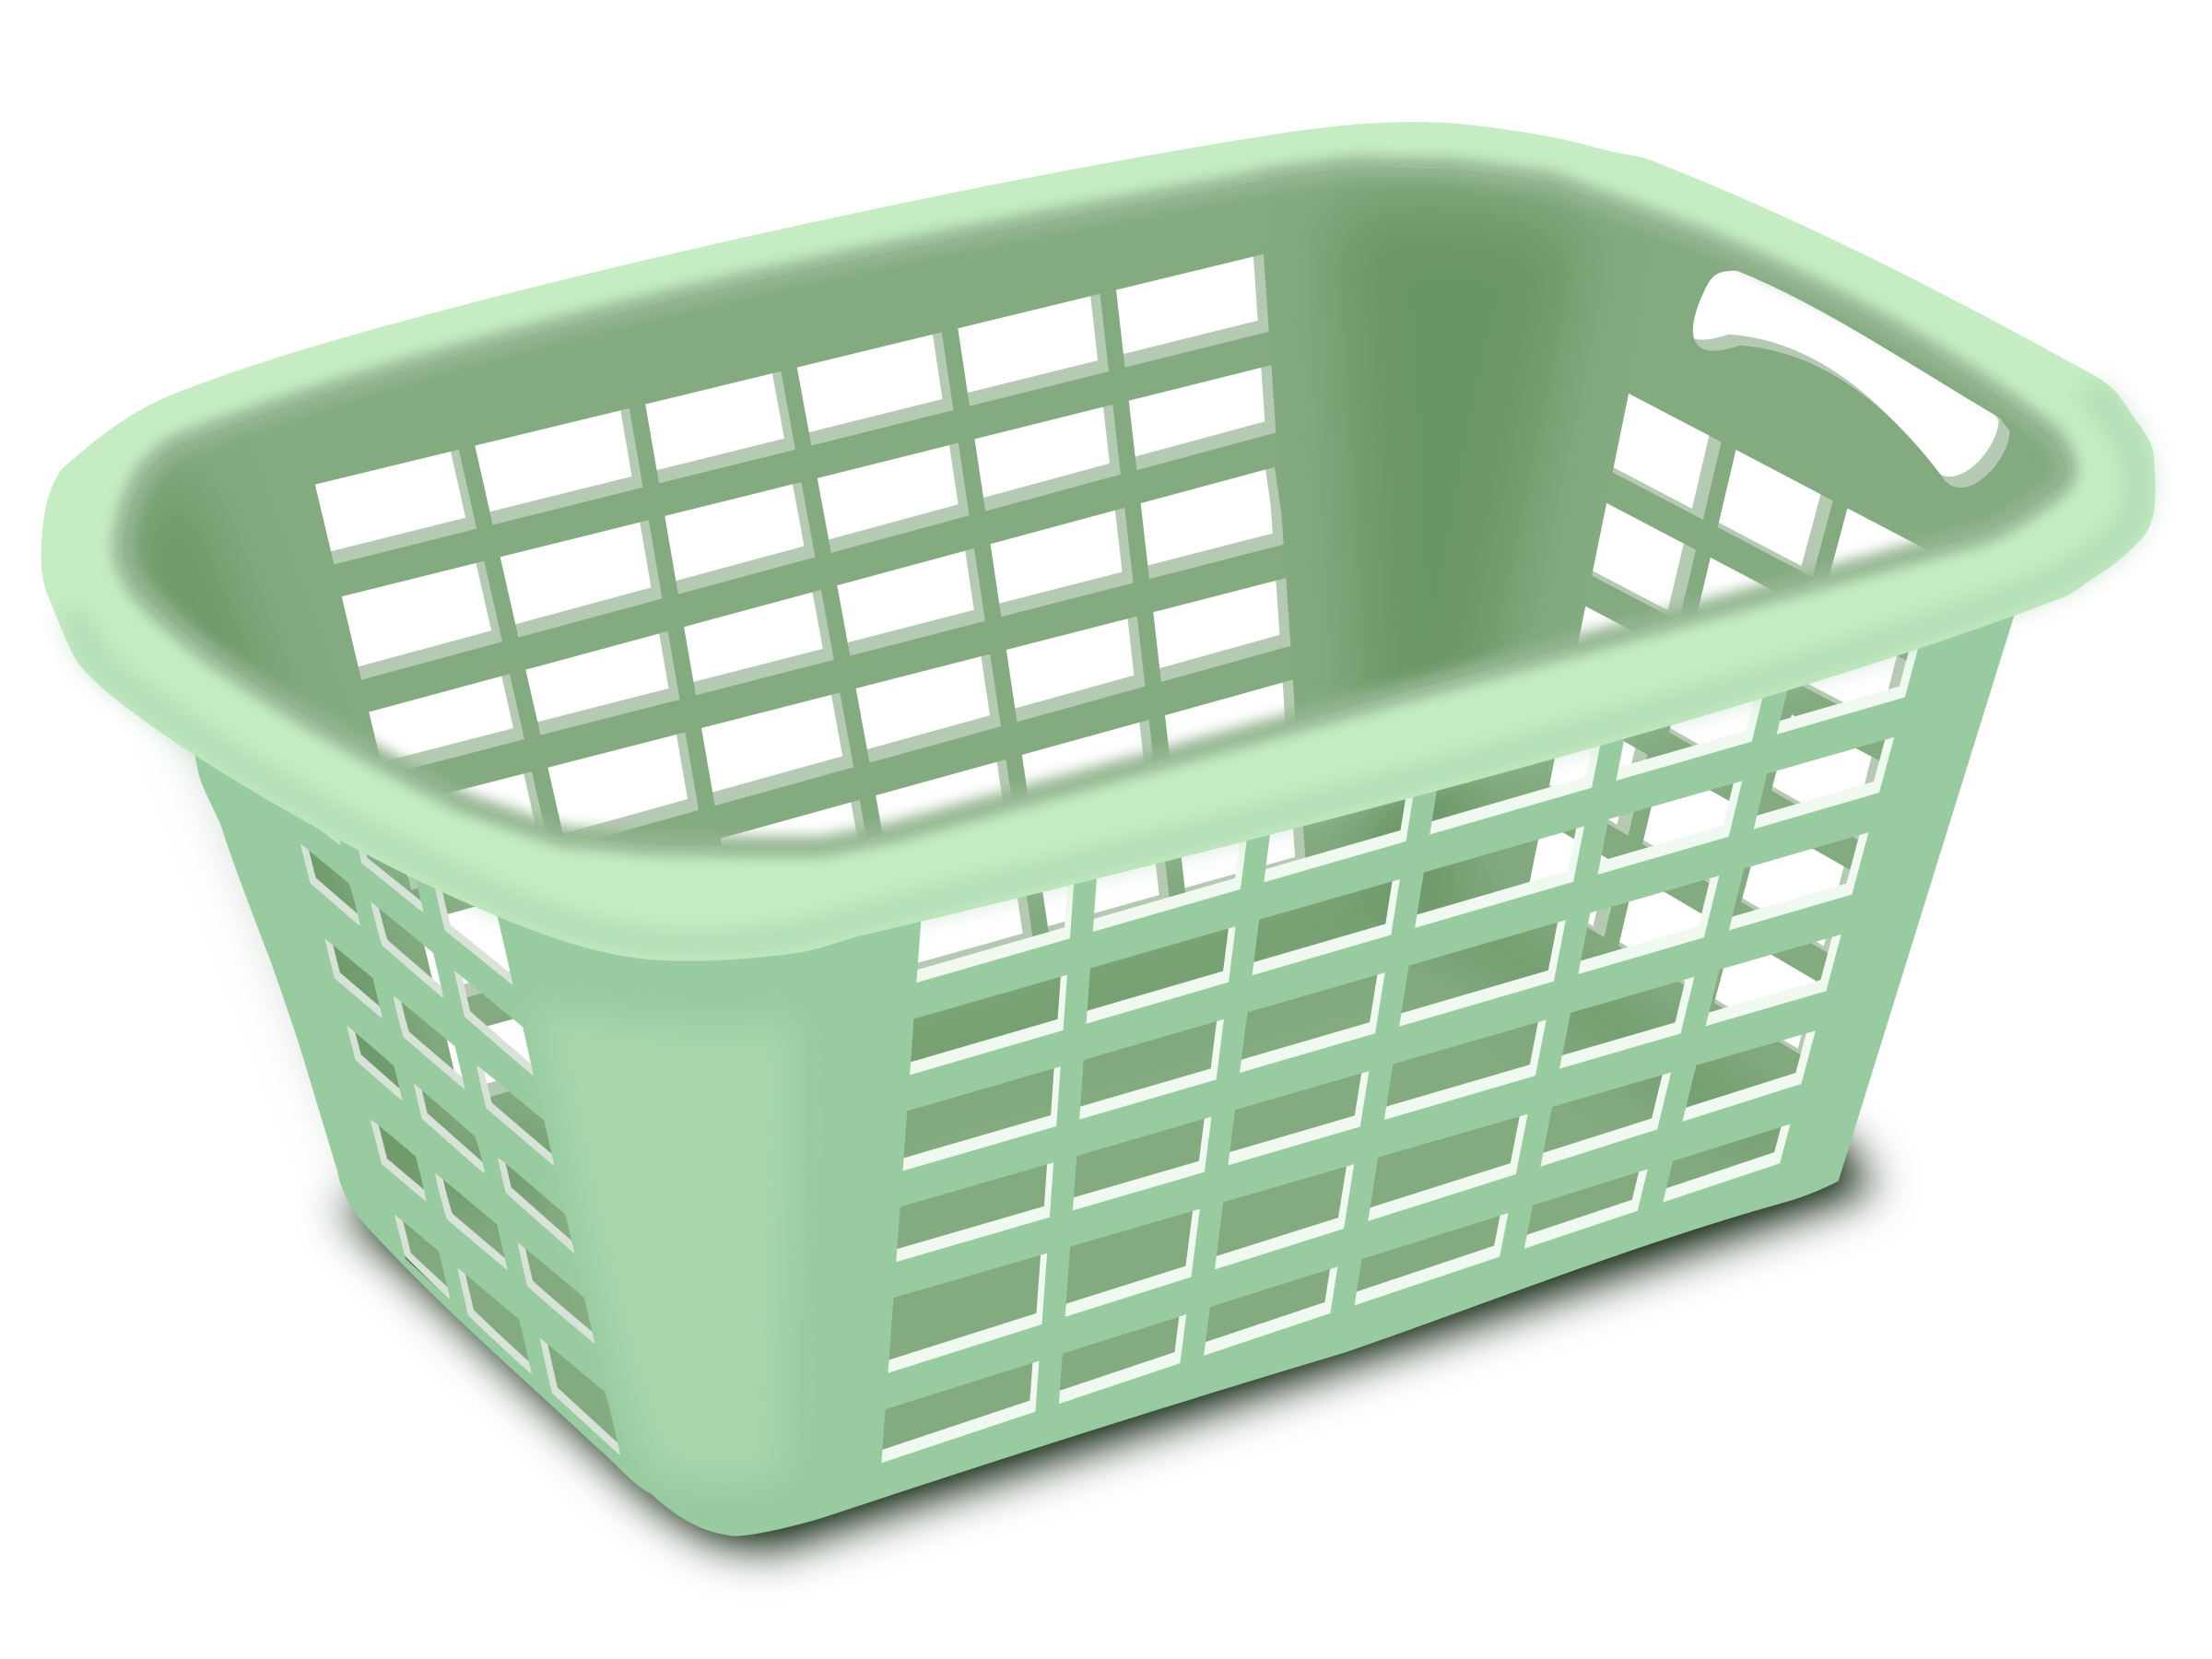 Clip Arts Related To : laundry basket with cloth. 